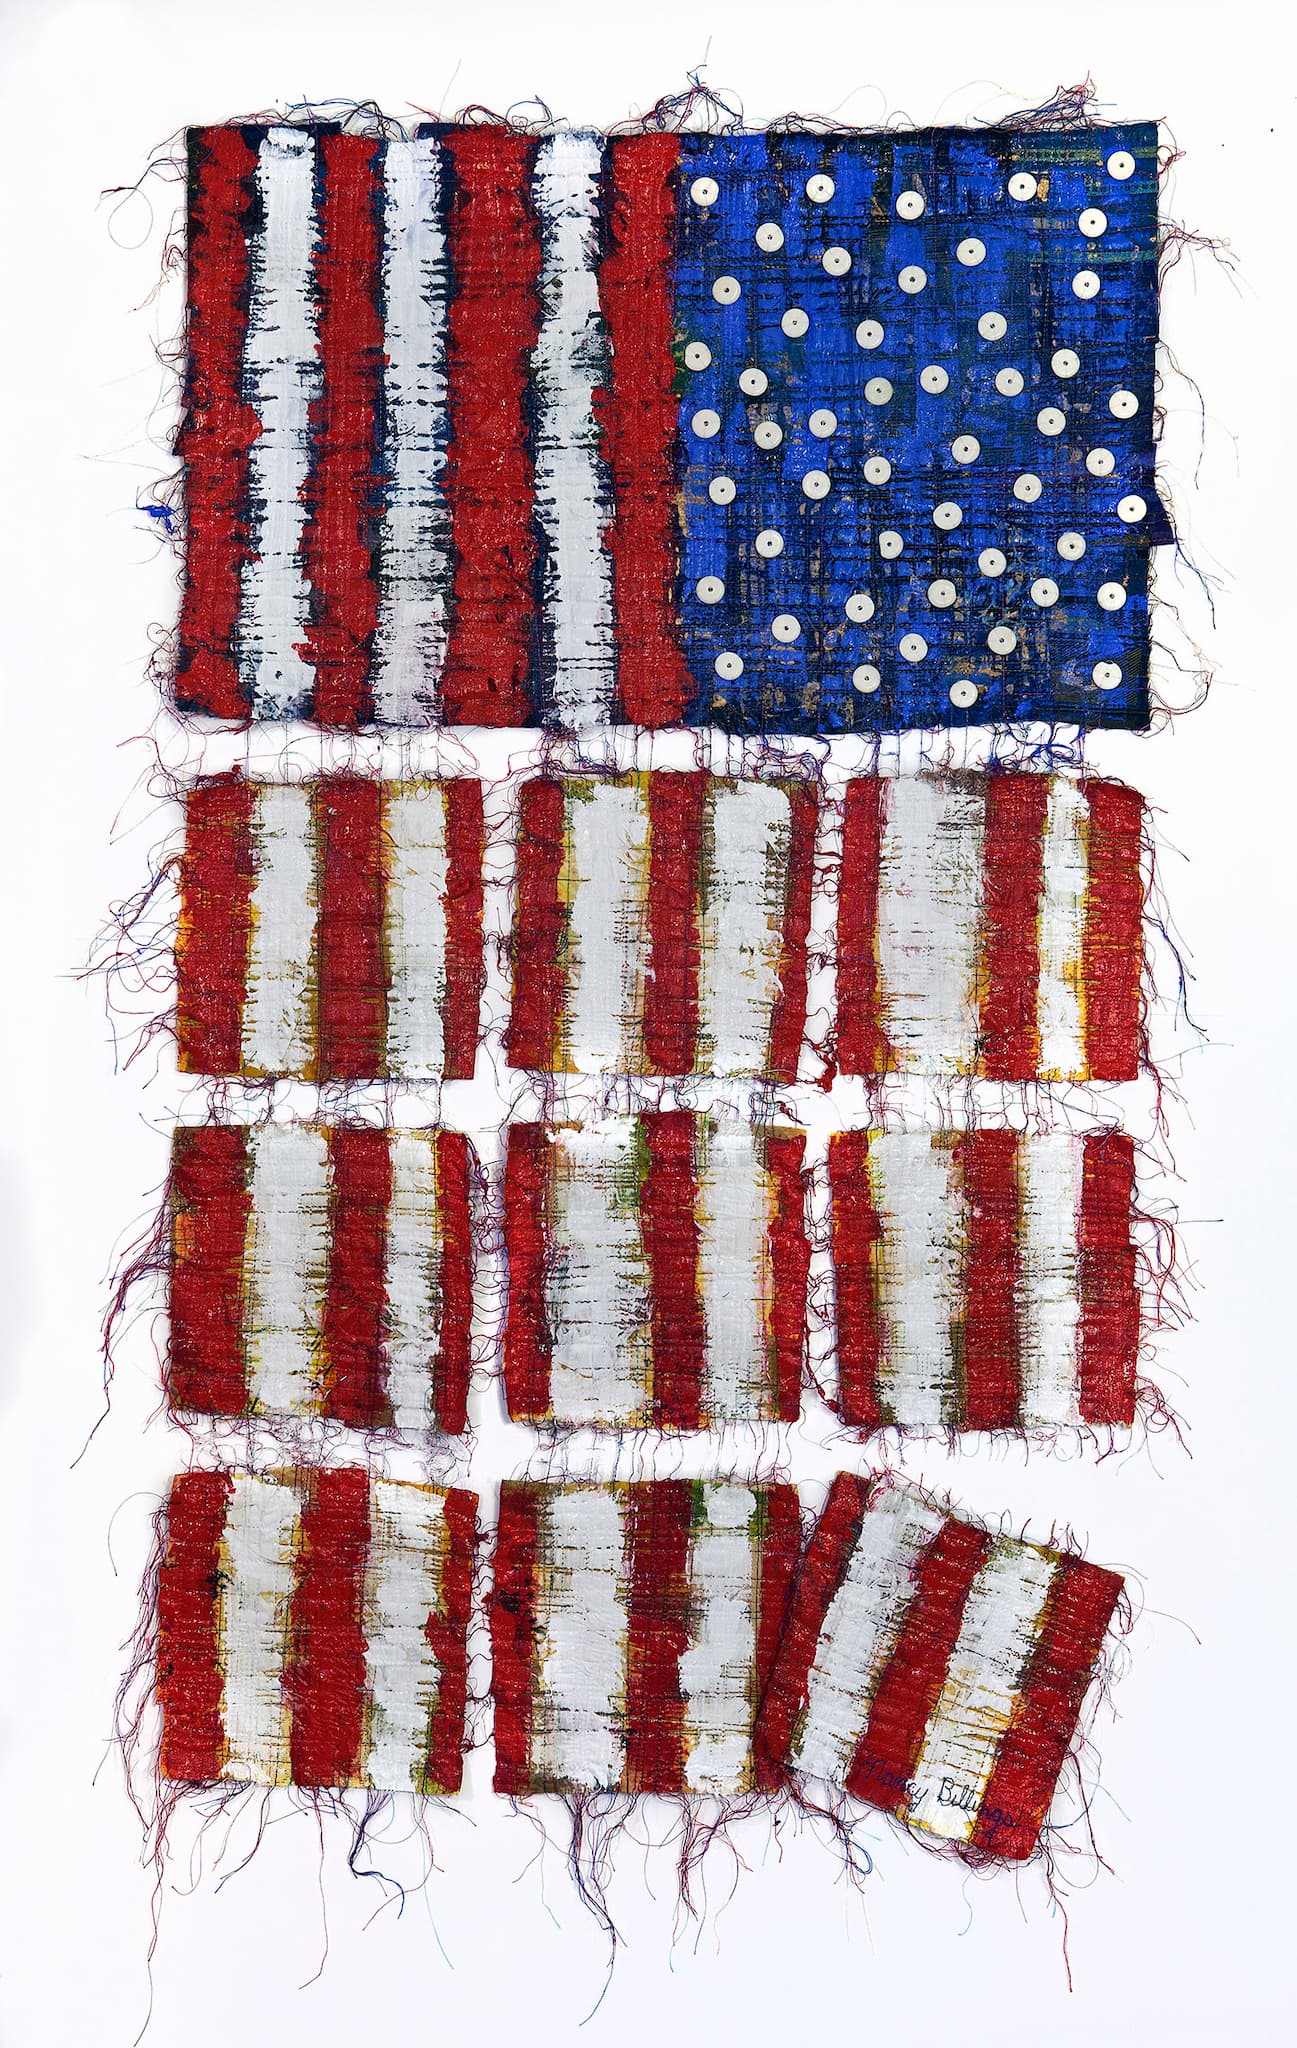 Craft in America Center, Flag Share 2020 Beyond, Nancy Billing, Democracy...Hanging By A Thread I, 2020